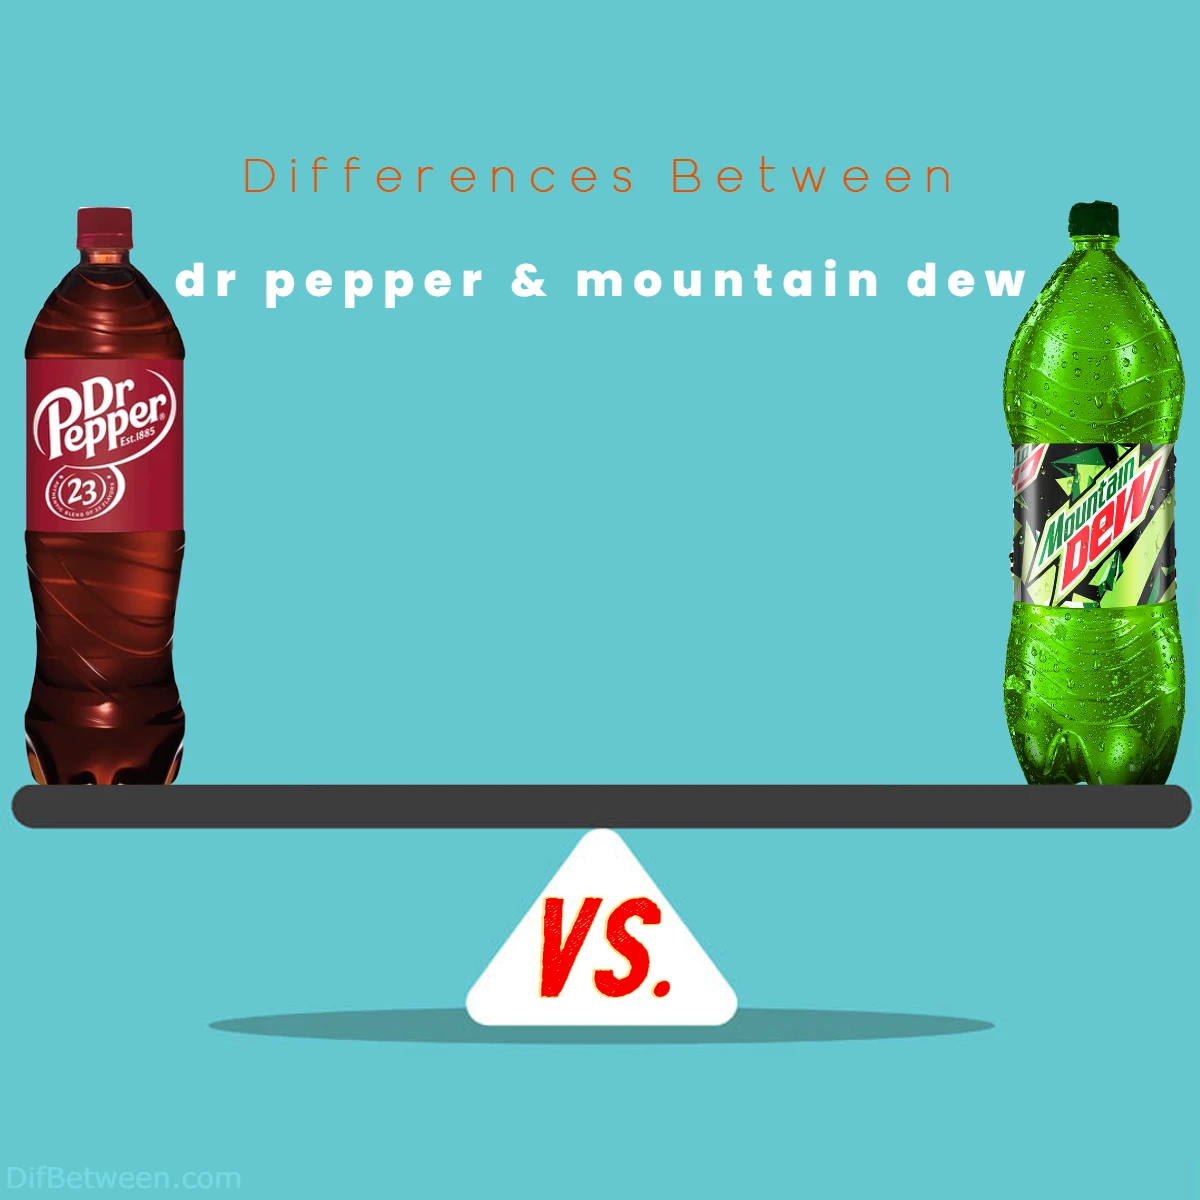 Differences Between Mountain Dew and Dr Pepper